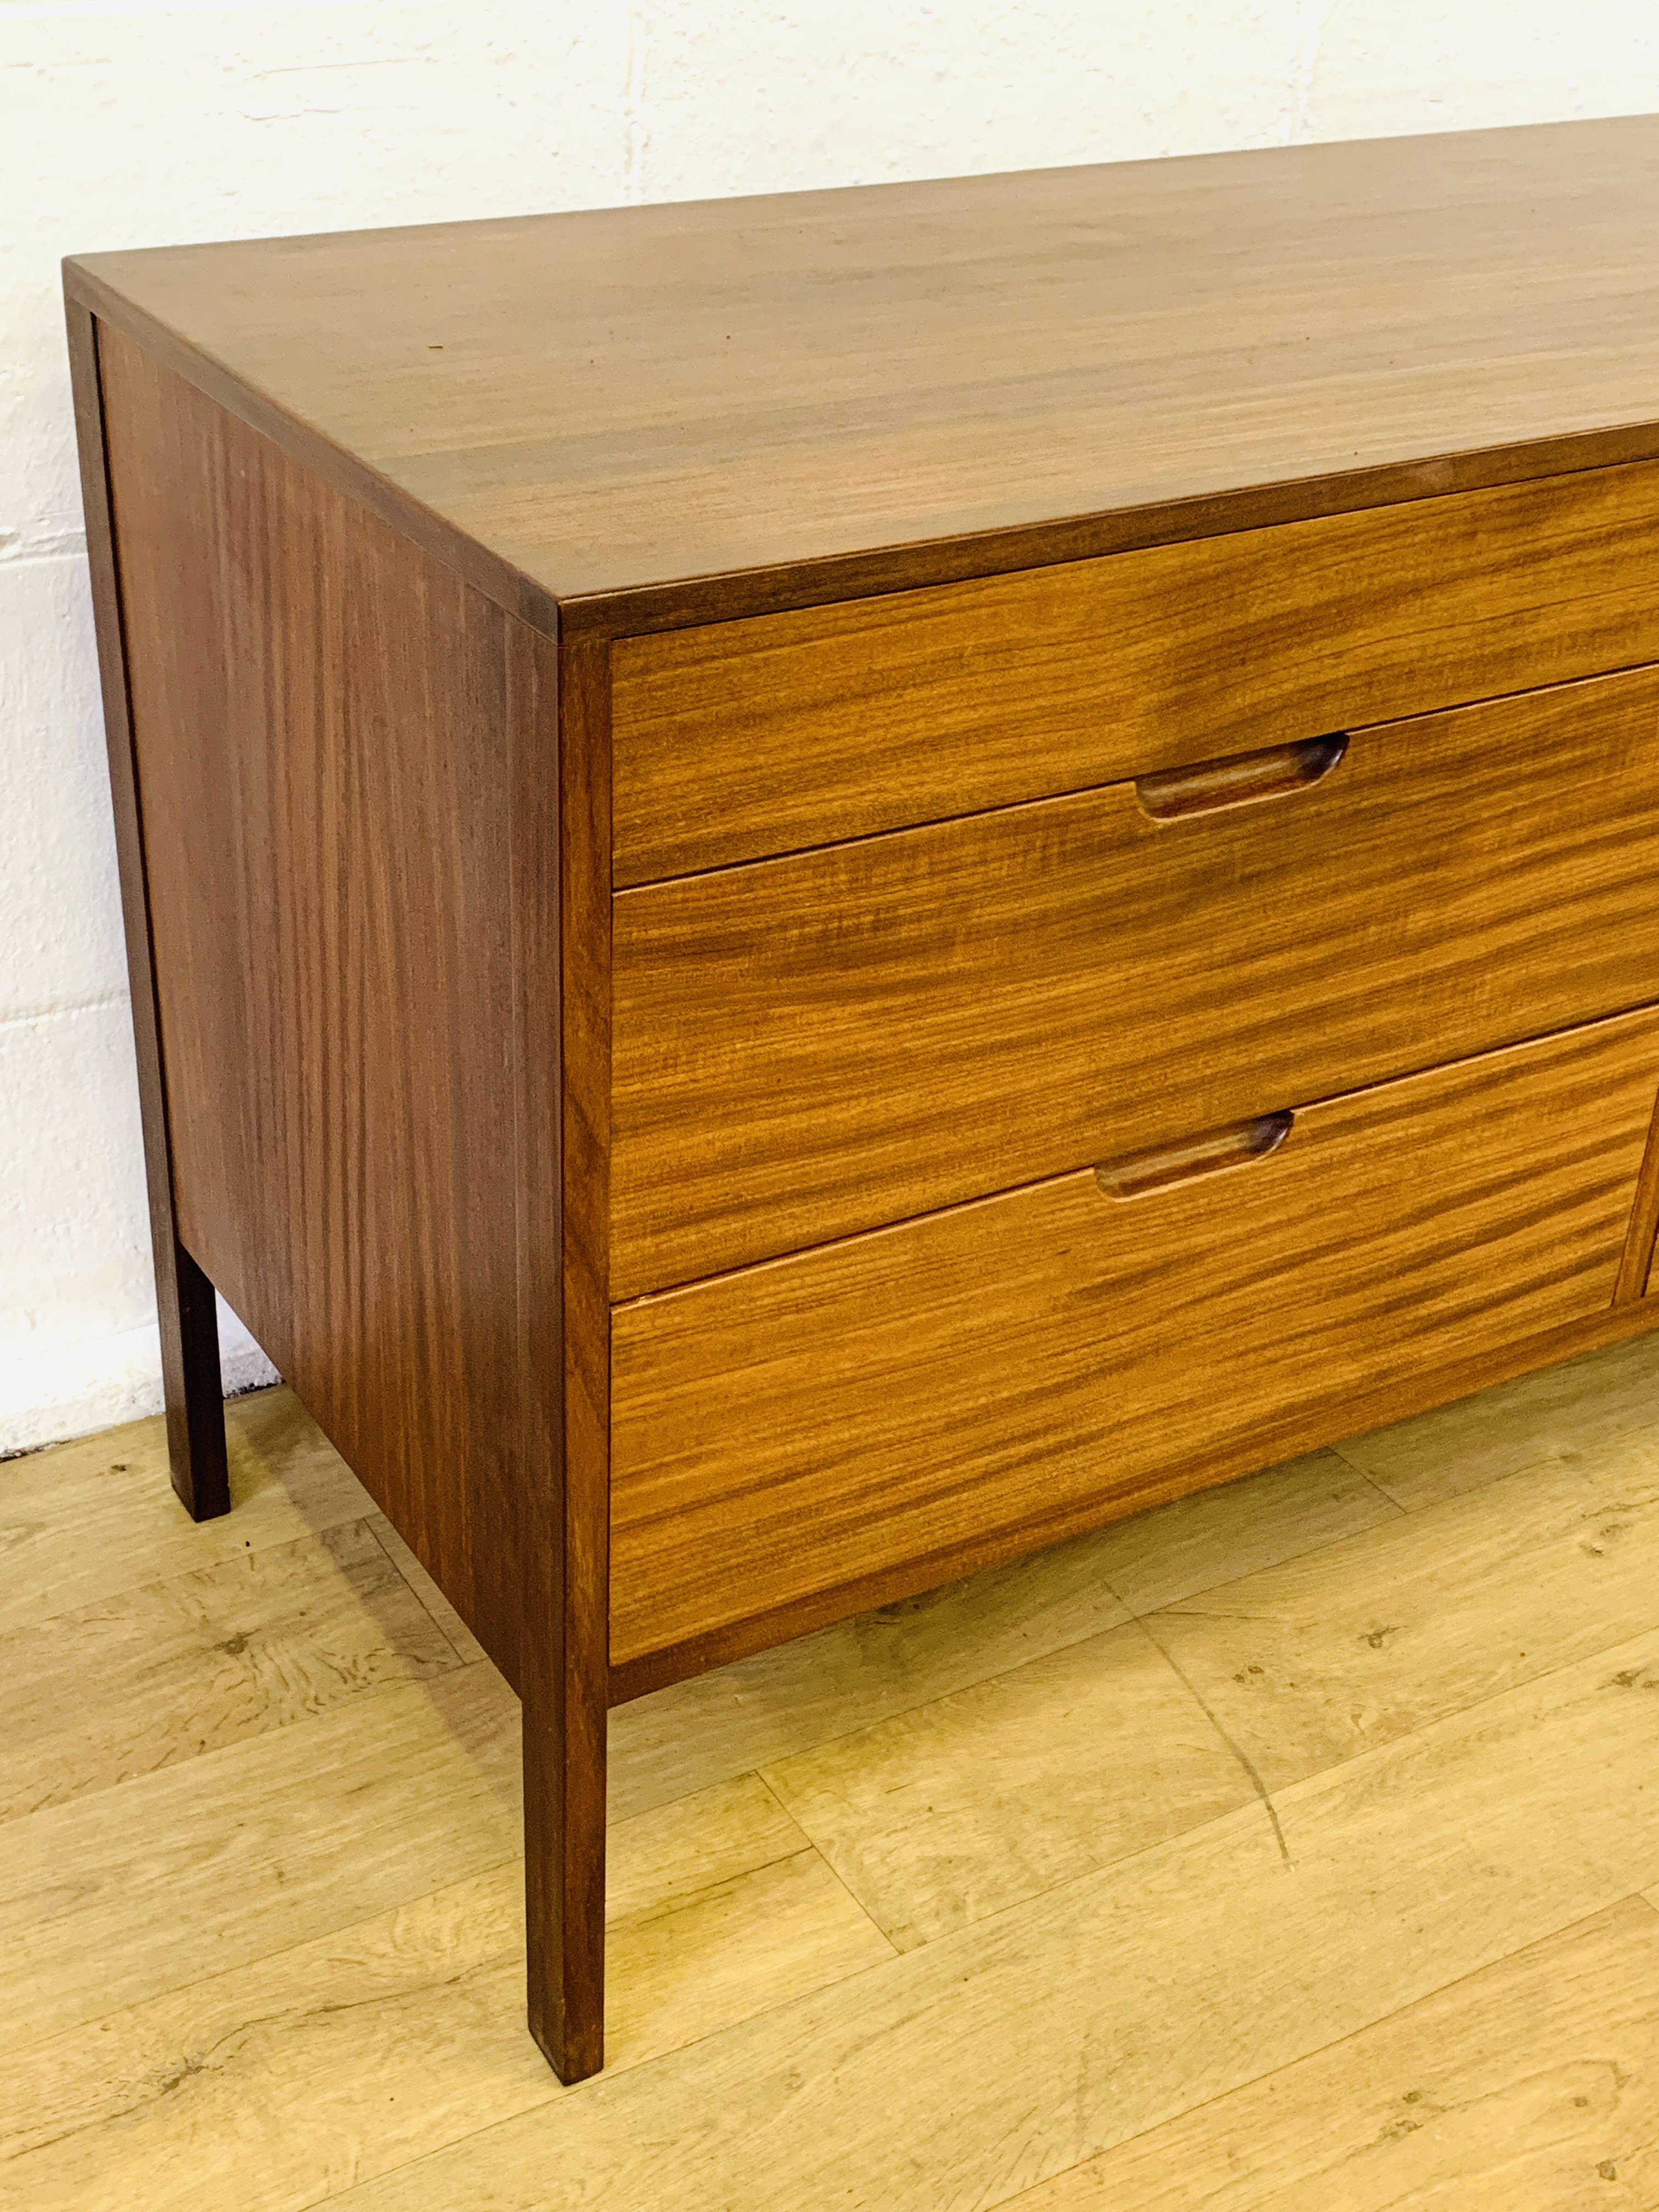 Teak chest of drawers - Image 4 of 7